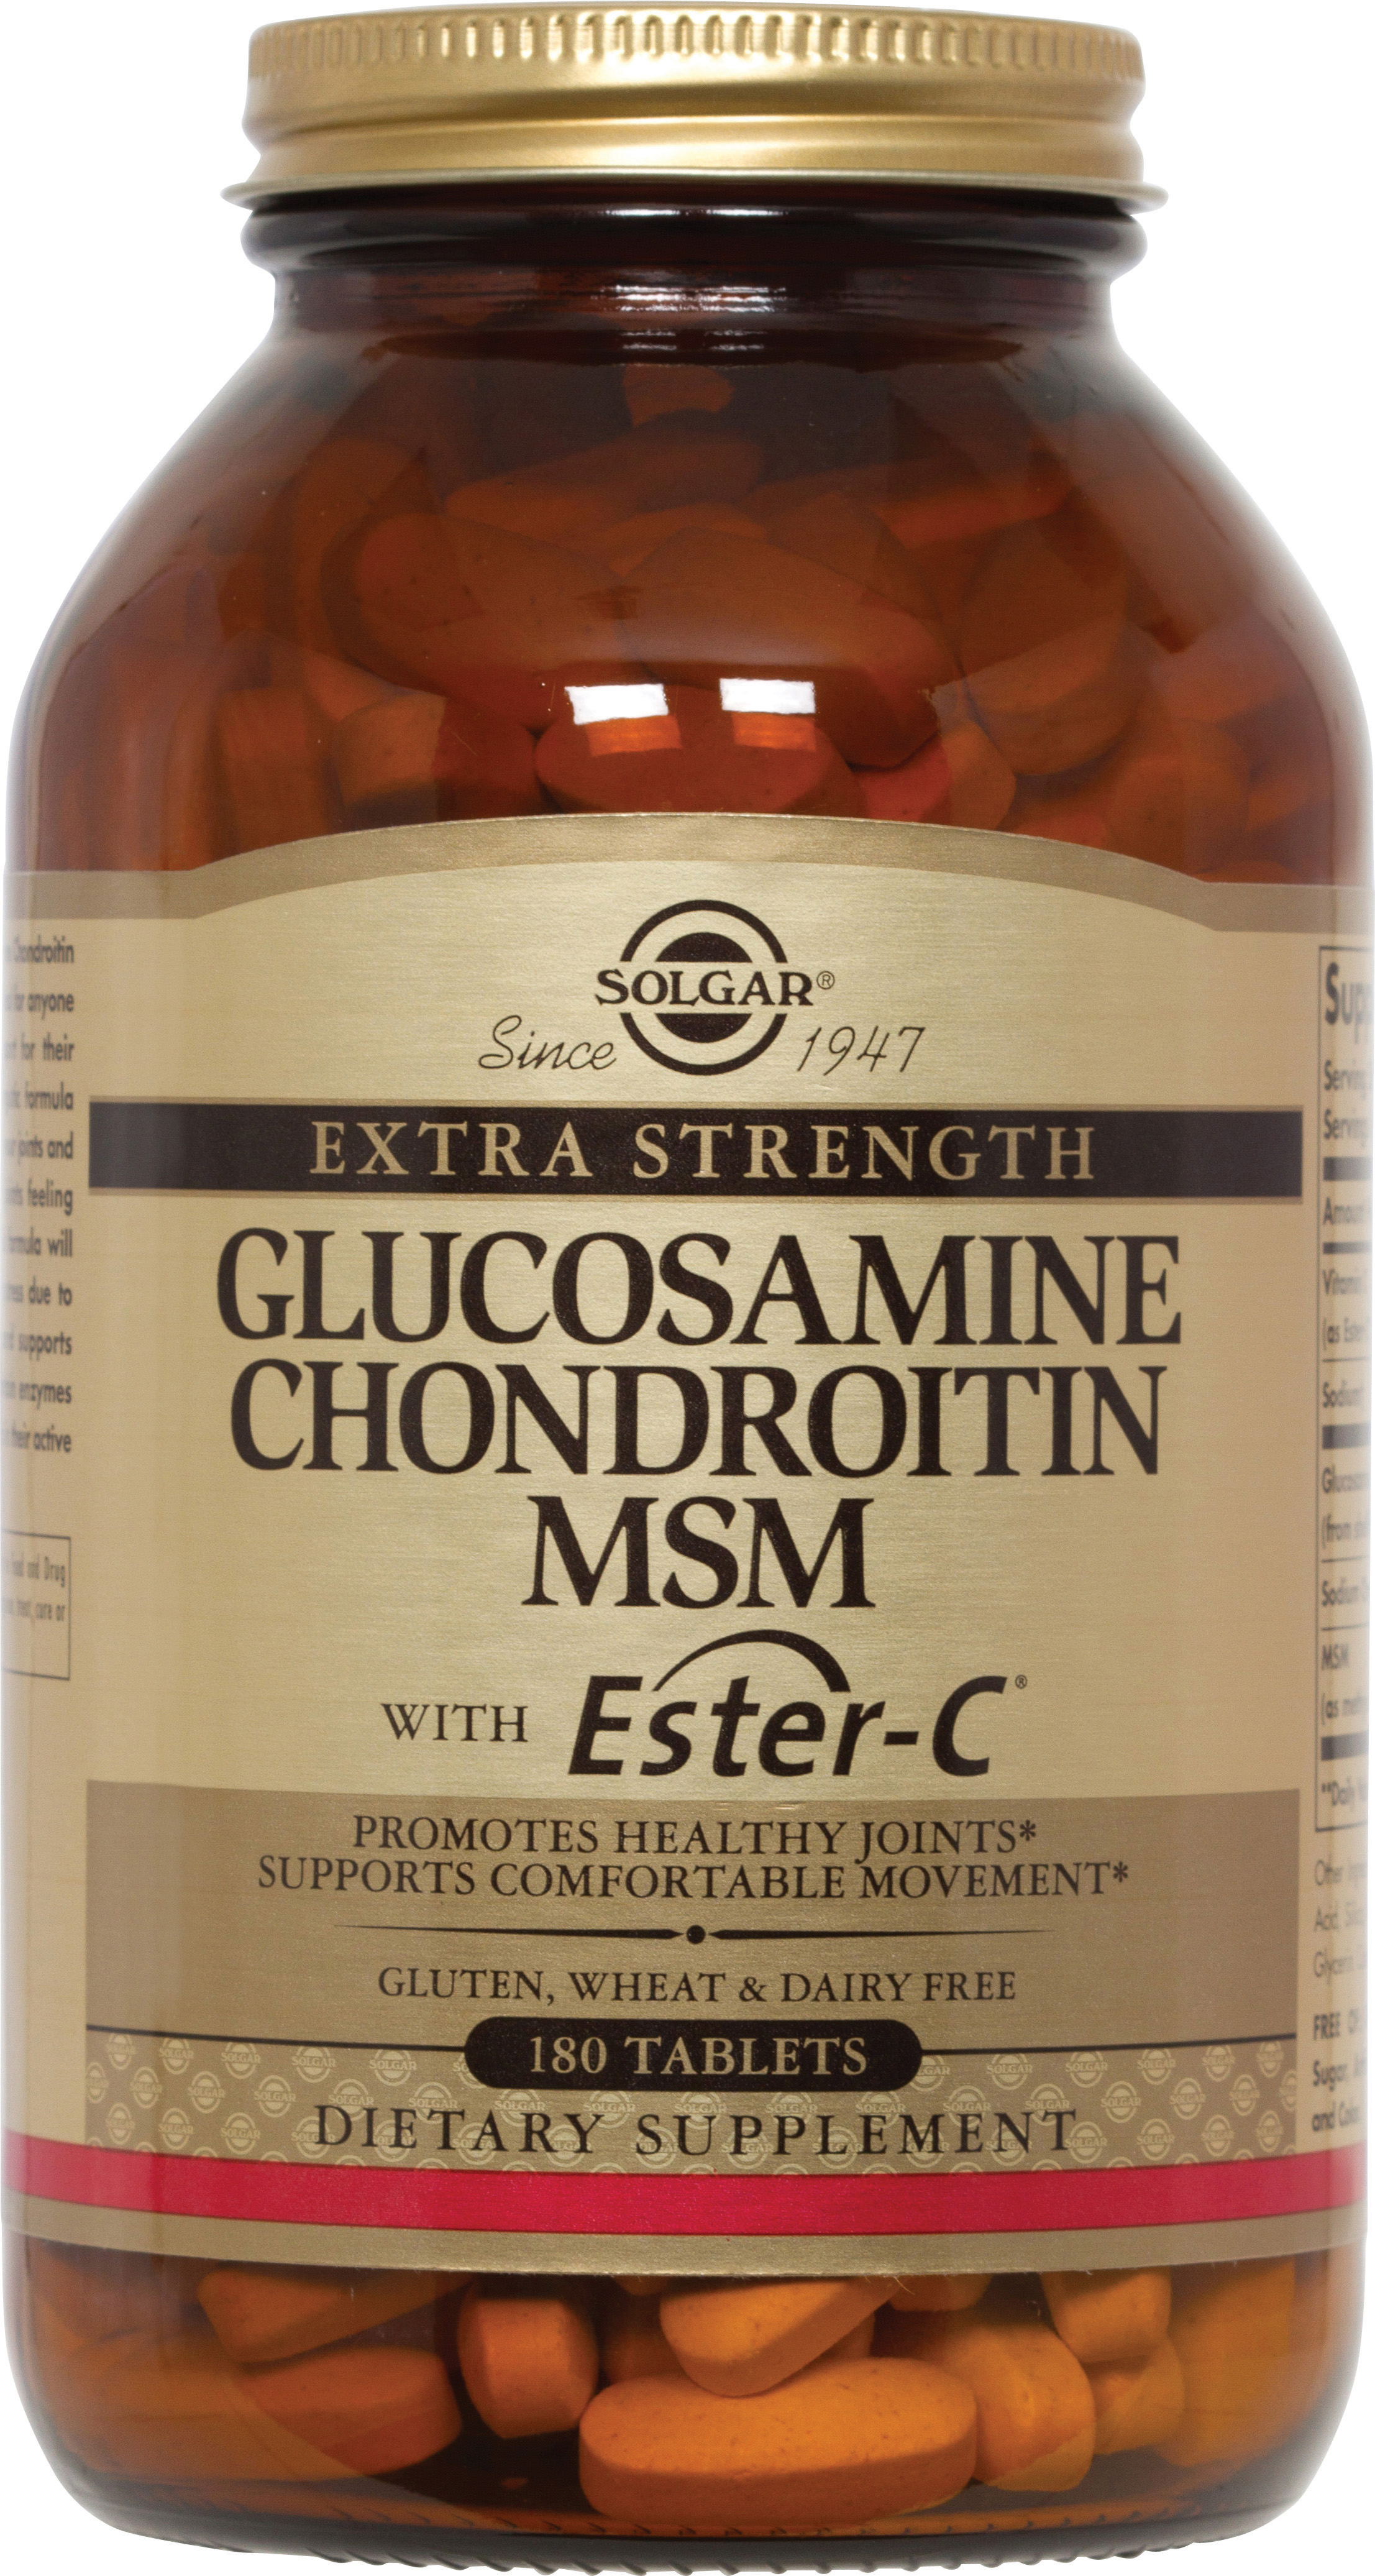 Extra Strength Glucosamine  Chondroitin MSM with Ester-C by Solgar